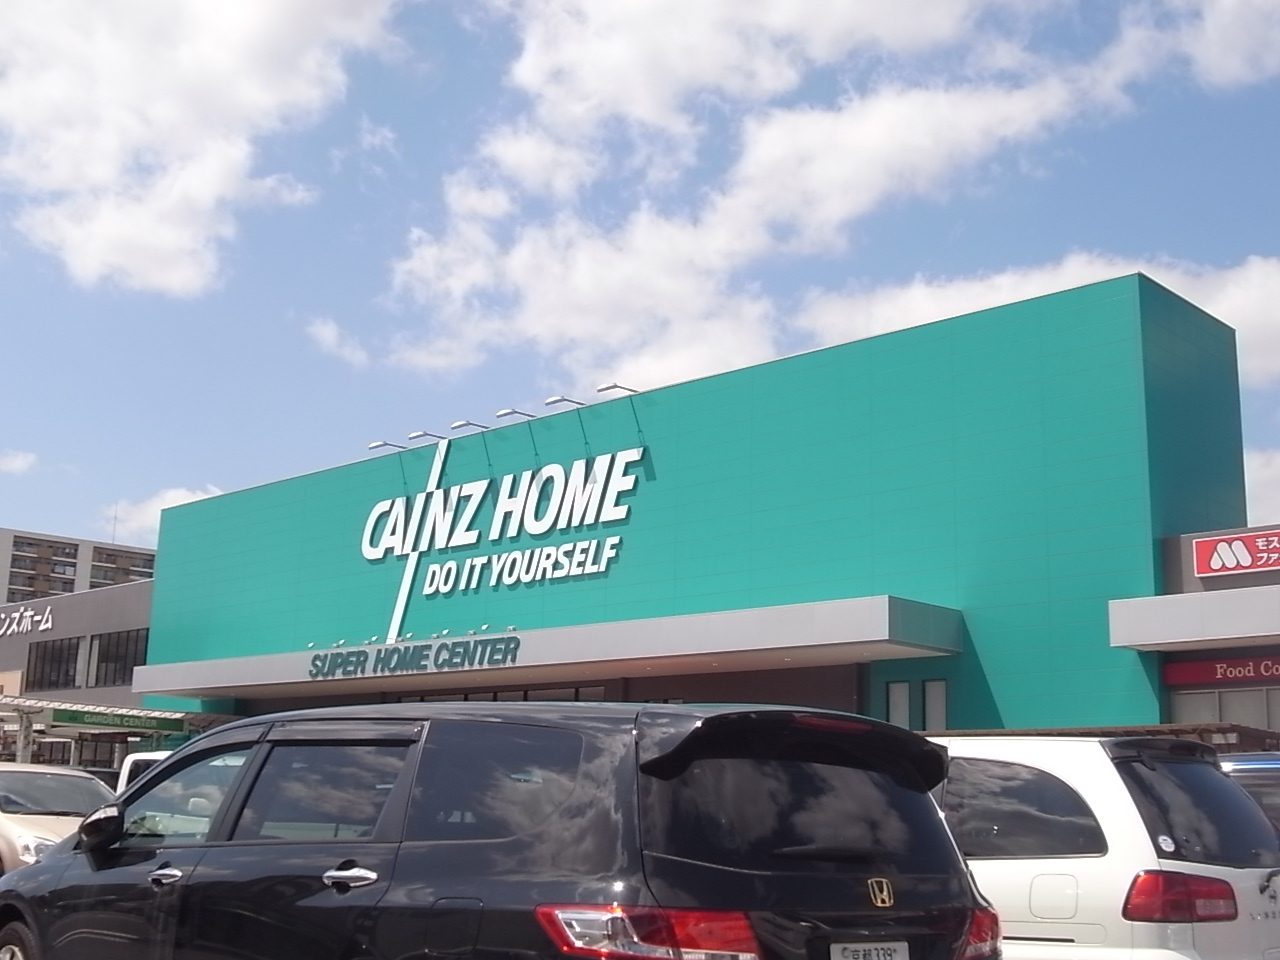 Home center. Cain home Nagoya Hotta store up (home improvement) 965m